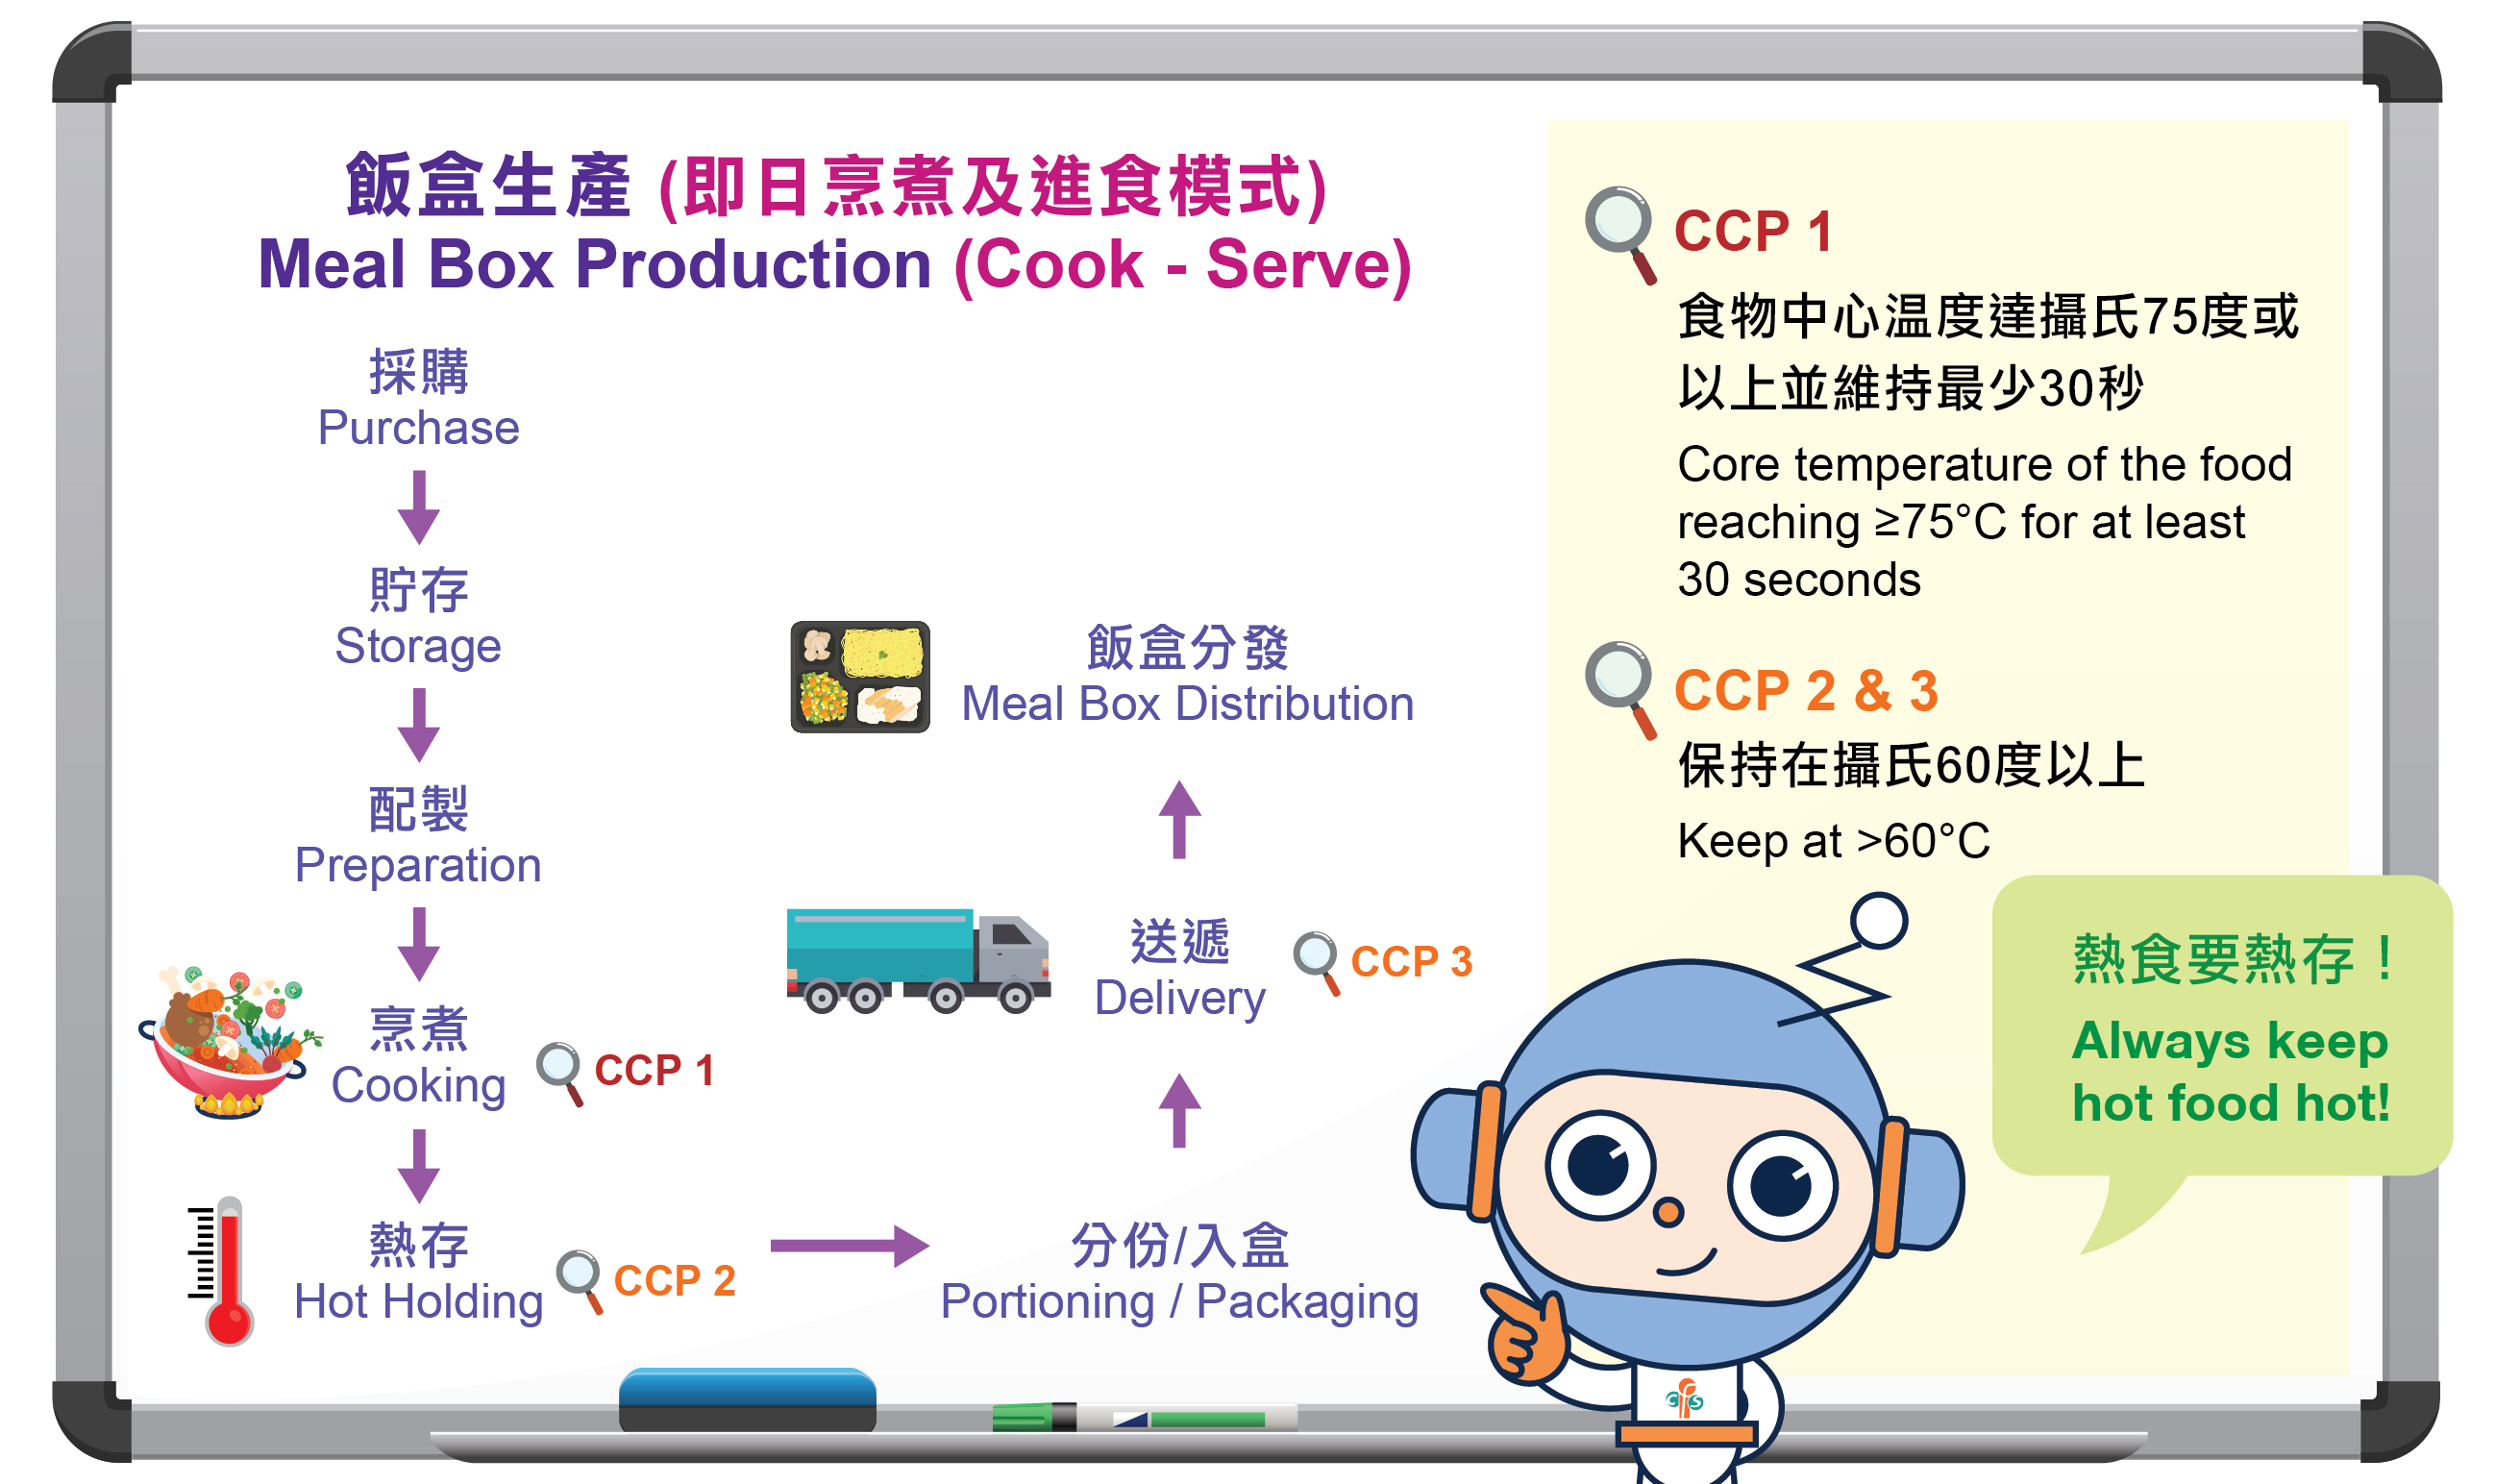 Schematic diagram and CCPs for meal box production